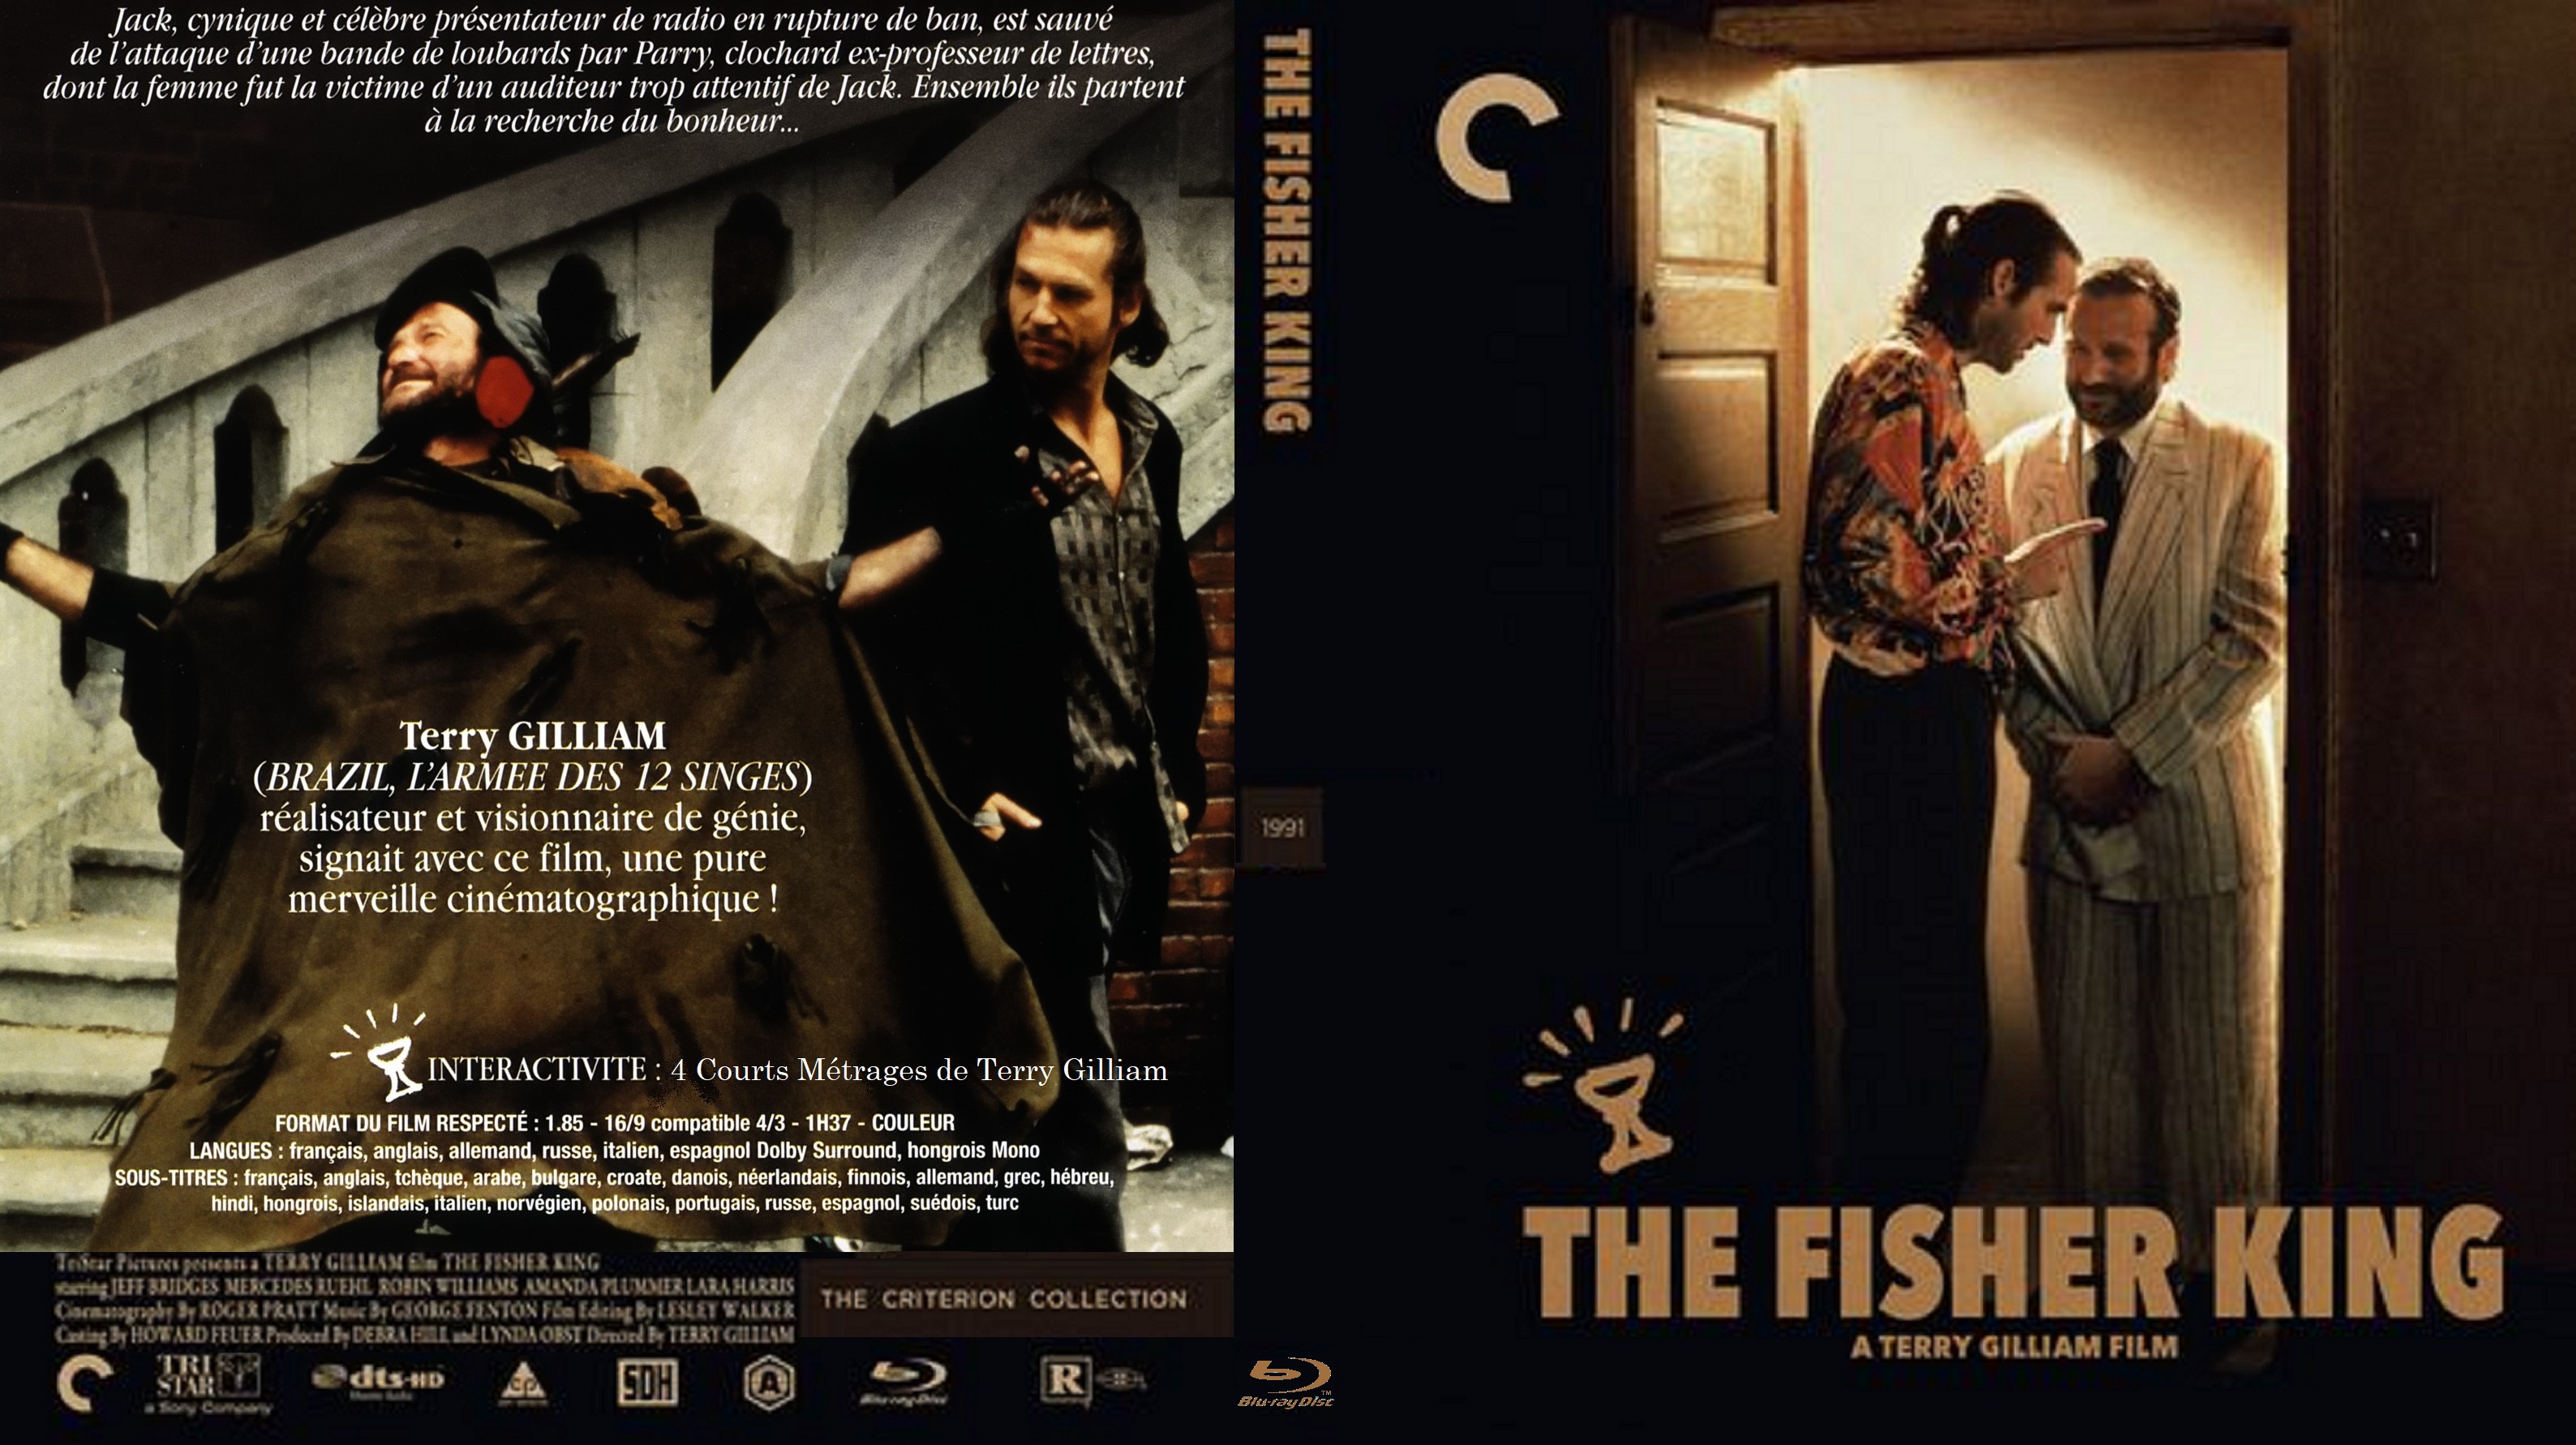 Jaquette DVD The fisher king custom (BLU-RAY)